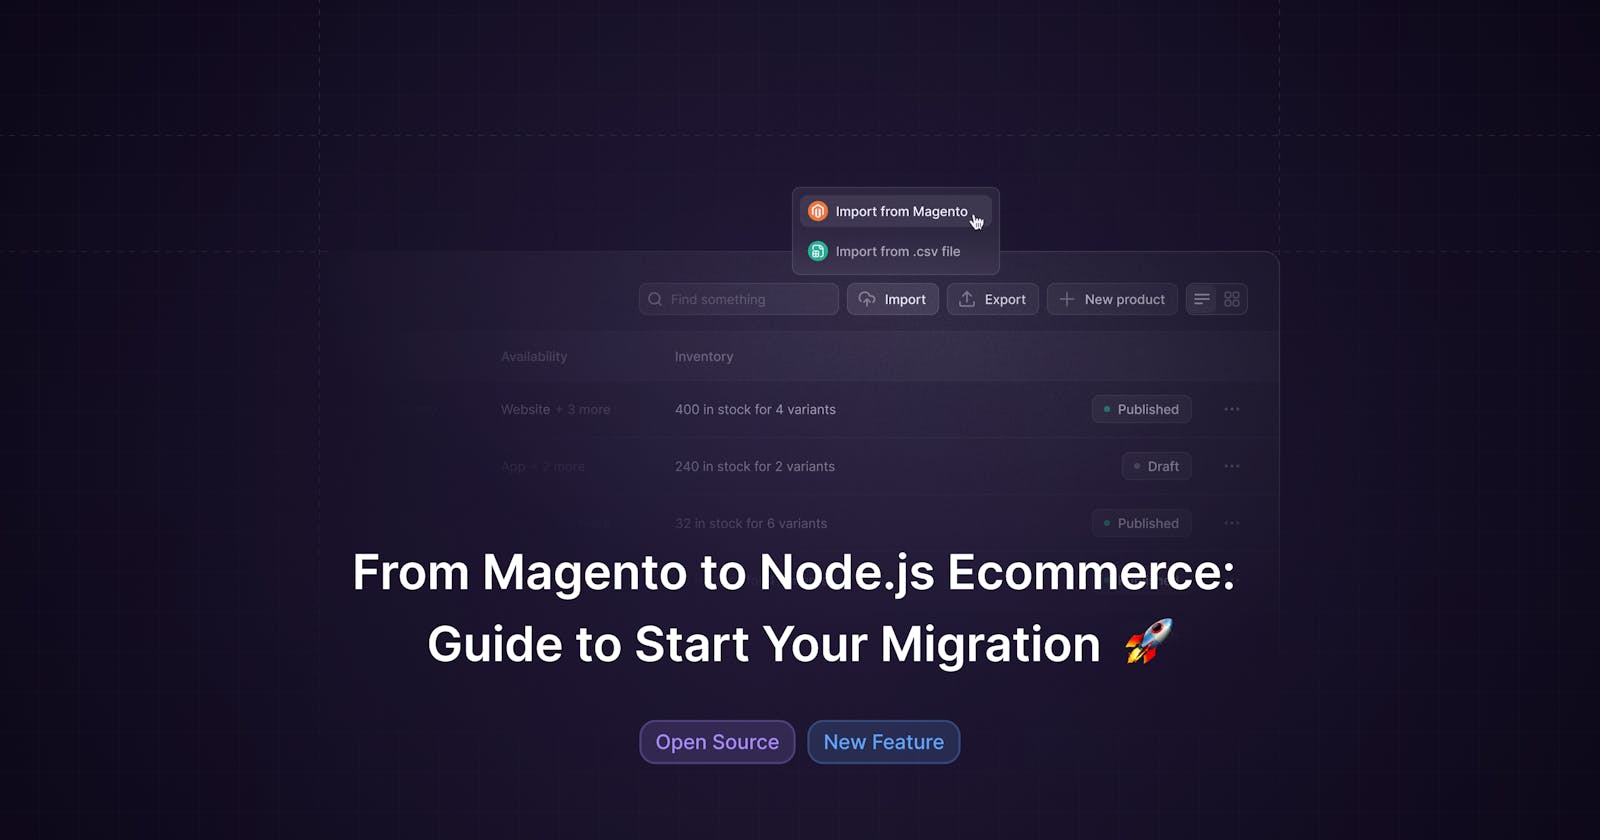 From Magento to Node.js Ecommerce: Guide to Start Your Migration 🚀